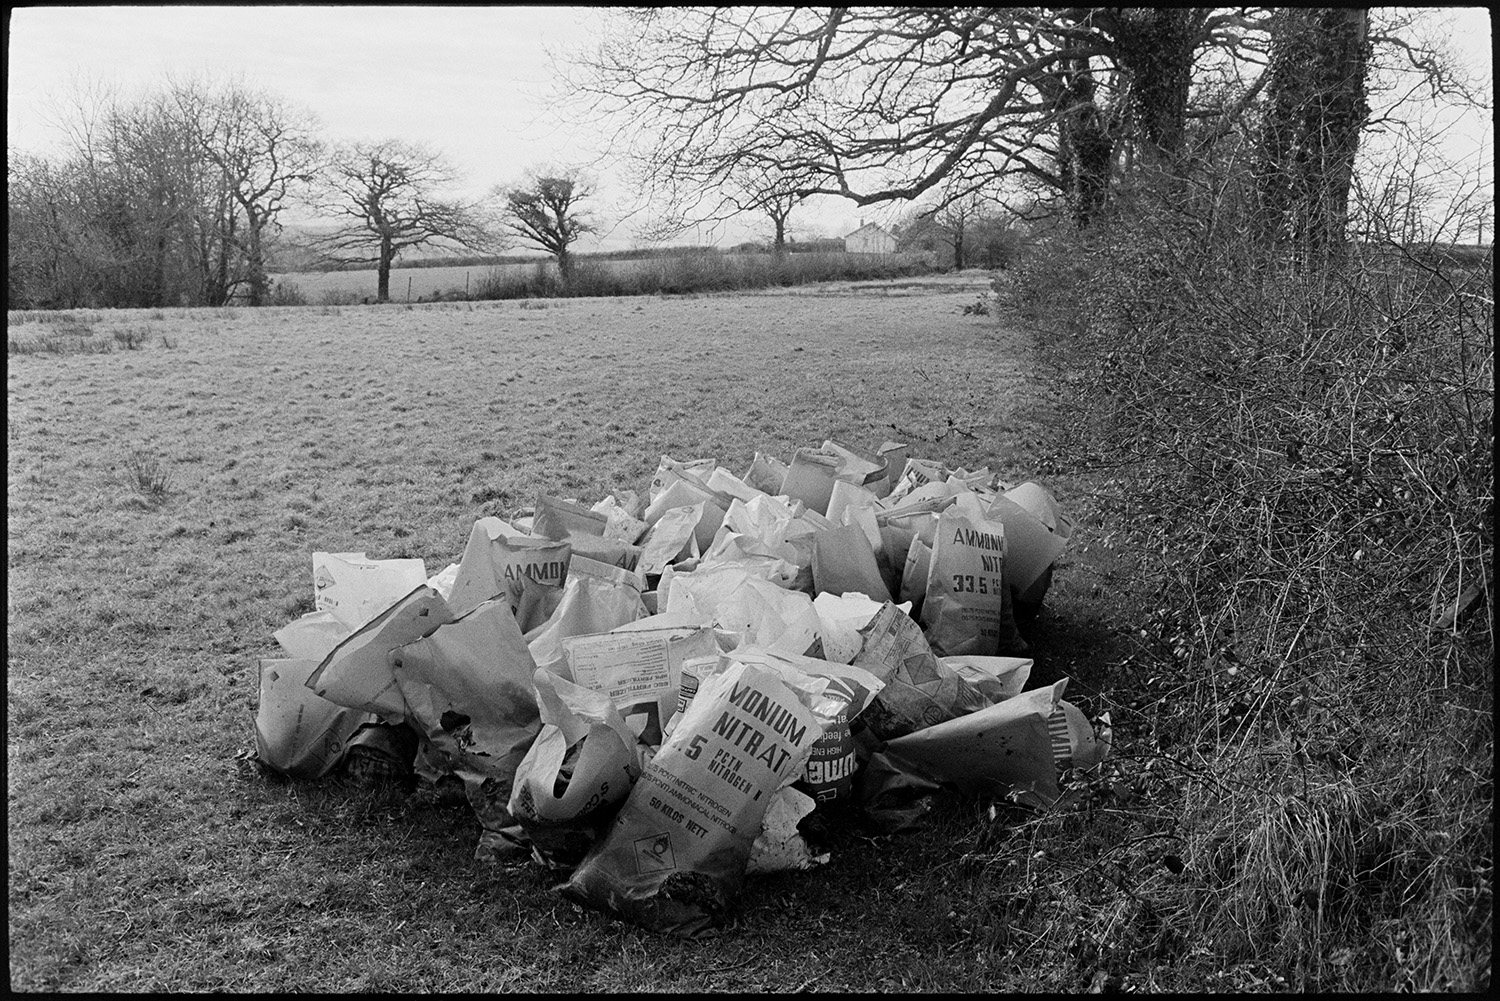 Polythene bags of rubble in field. 
[A pile of polythene bags full of rubble by a hedge in a field at Upcott, Dolton.]